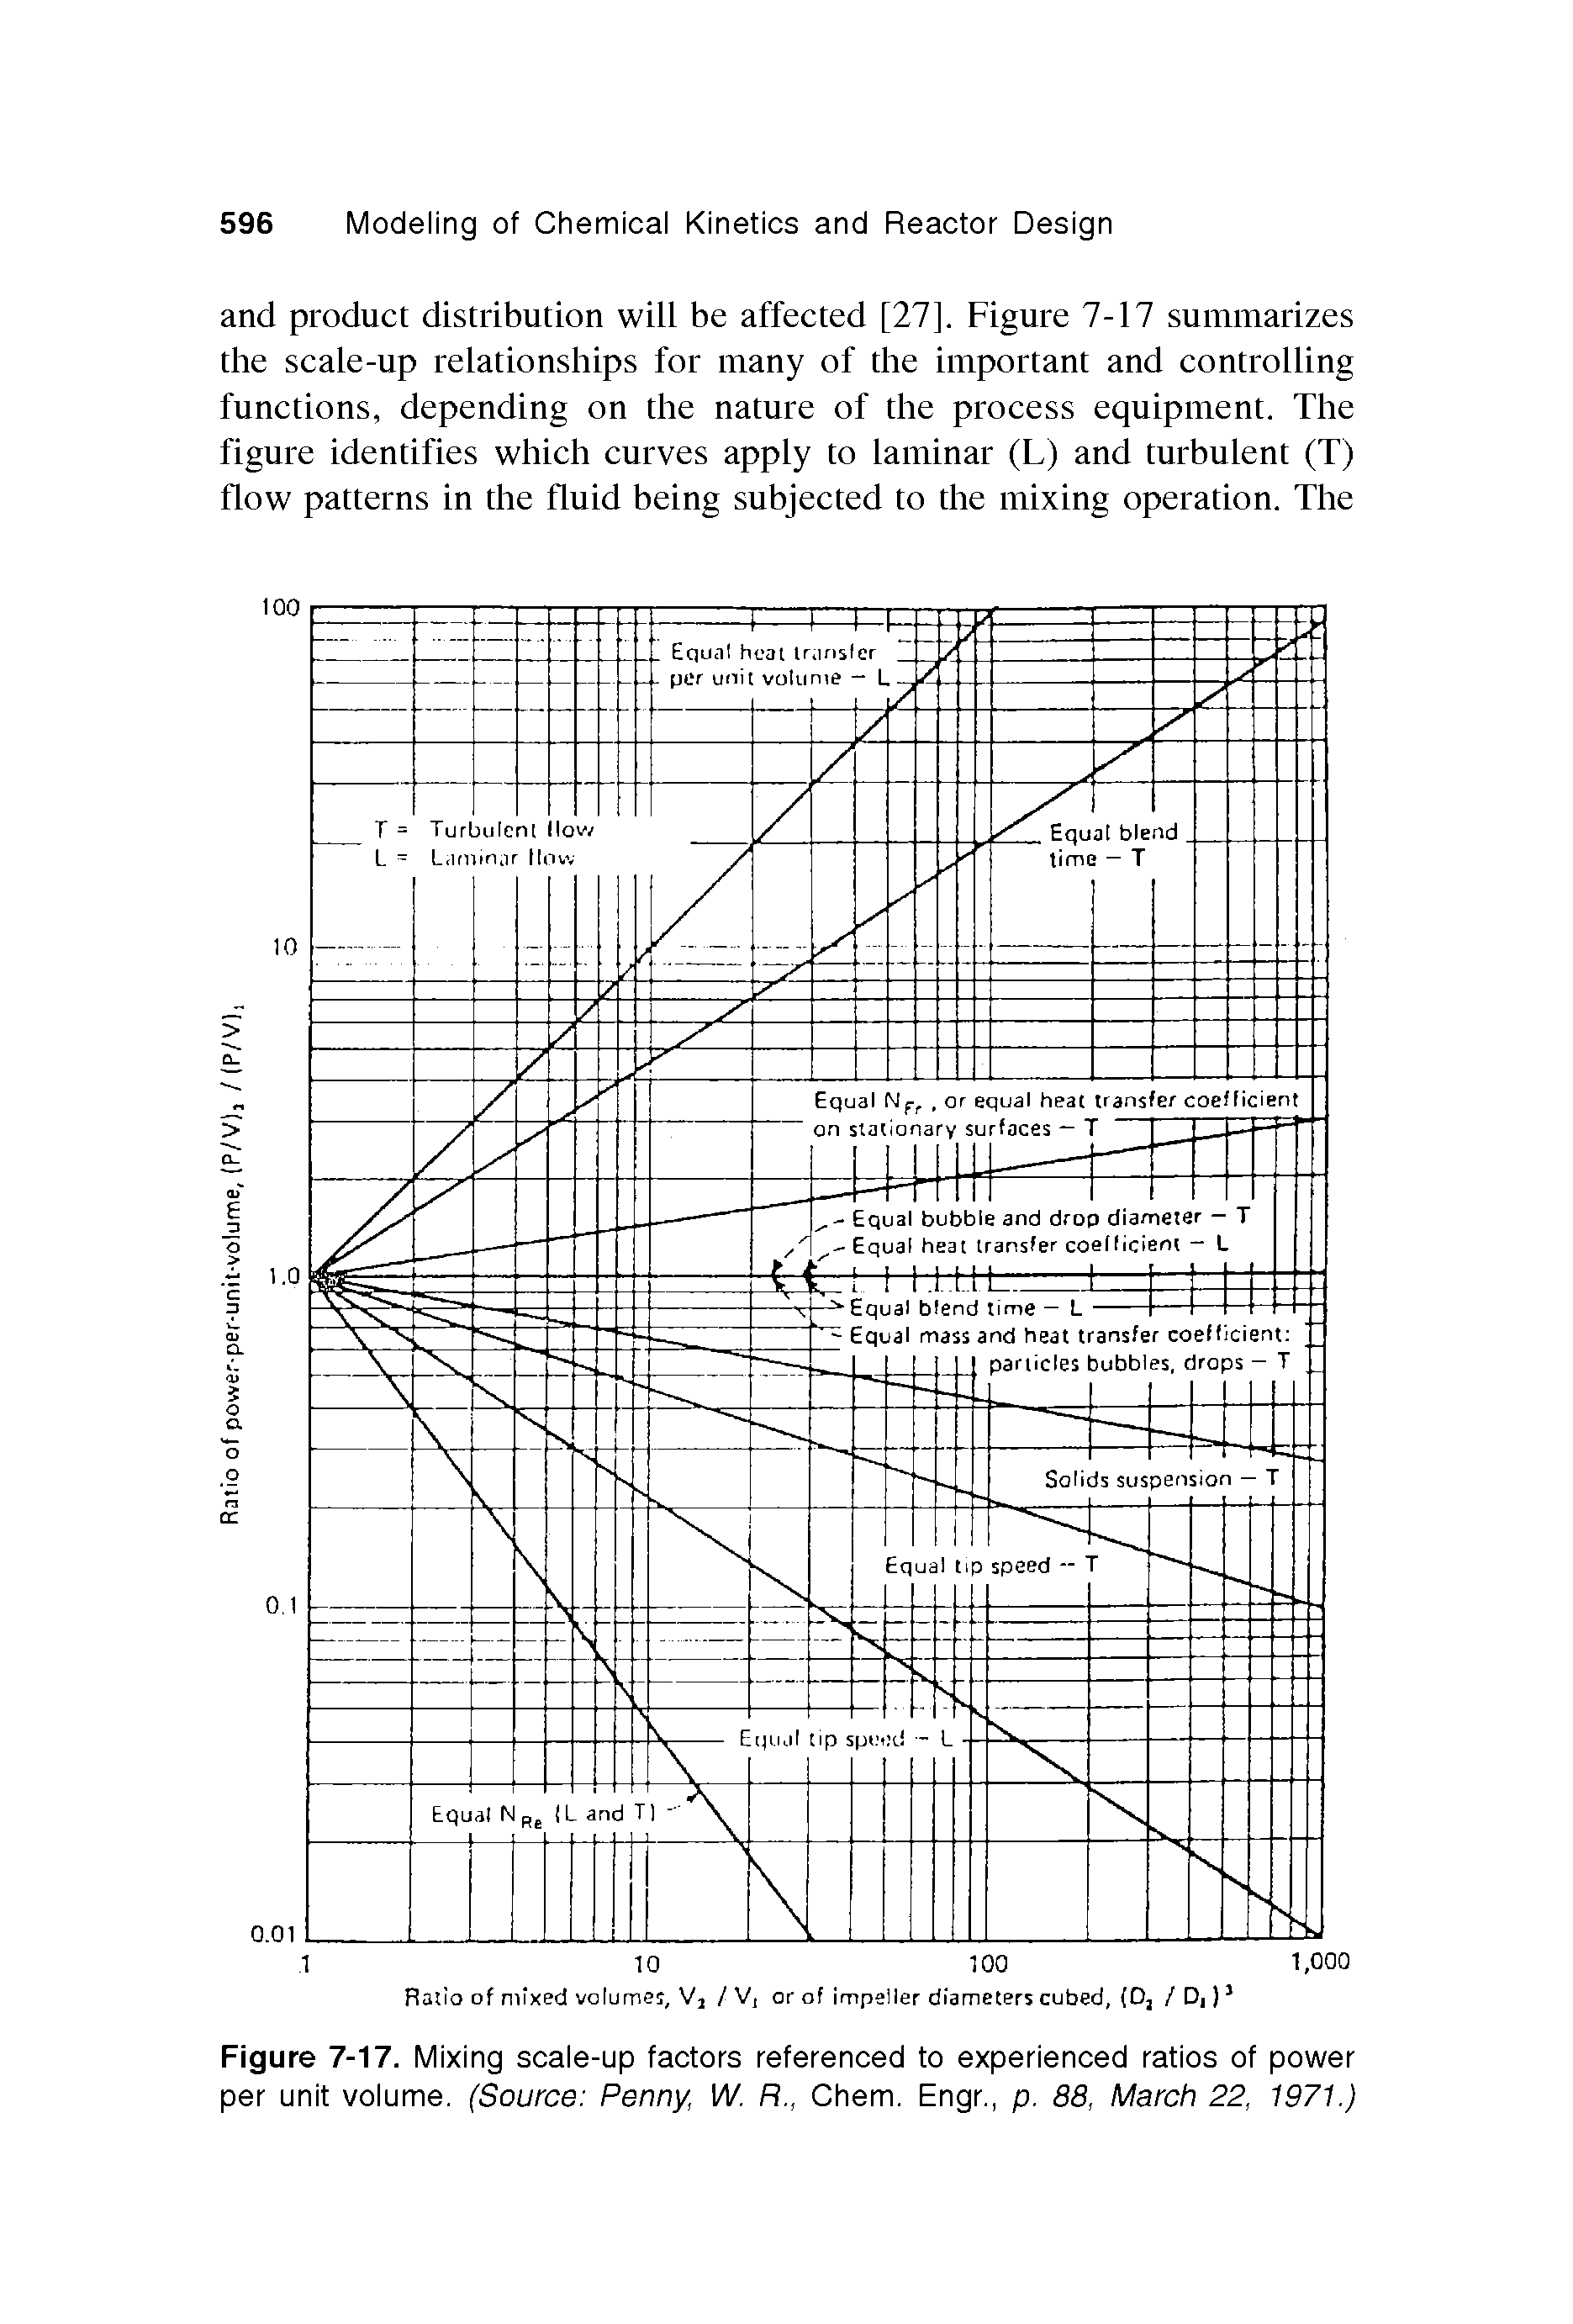 Figure 7-17. Mixing scale-up factors referenced to experienced ratios of power per unit volume. (Source Penny, N. R Chem. Engr., p, 88, March 22, 1971.)...